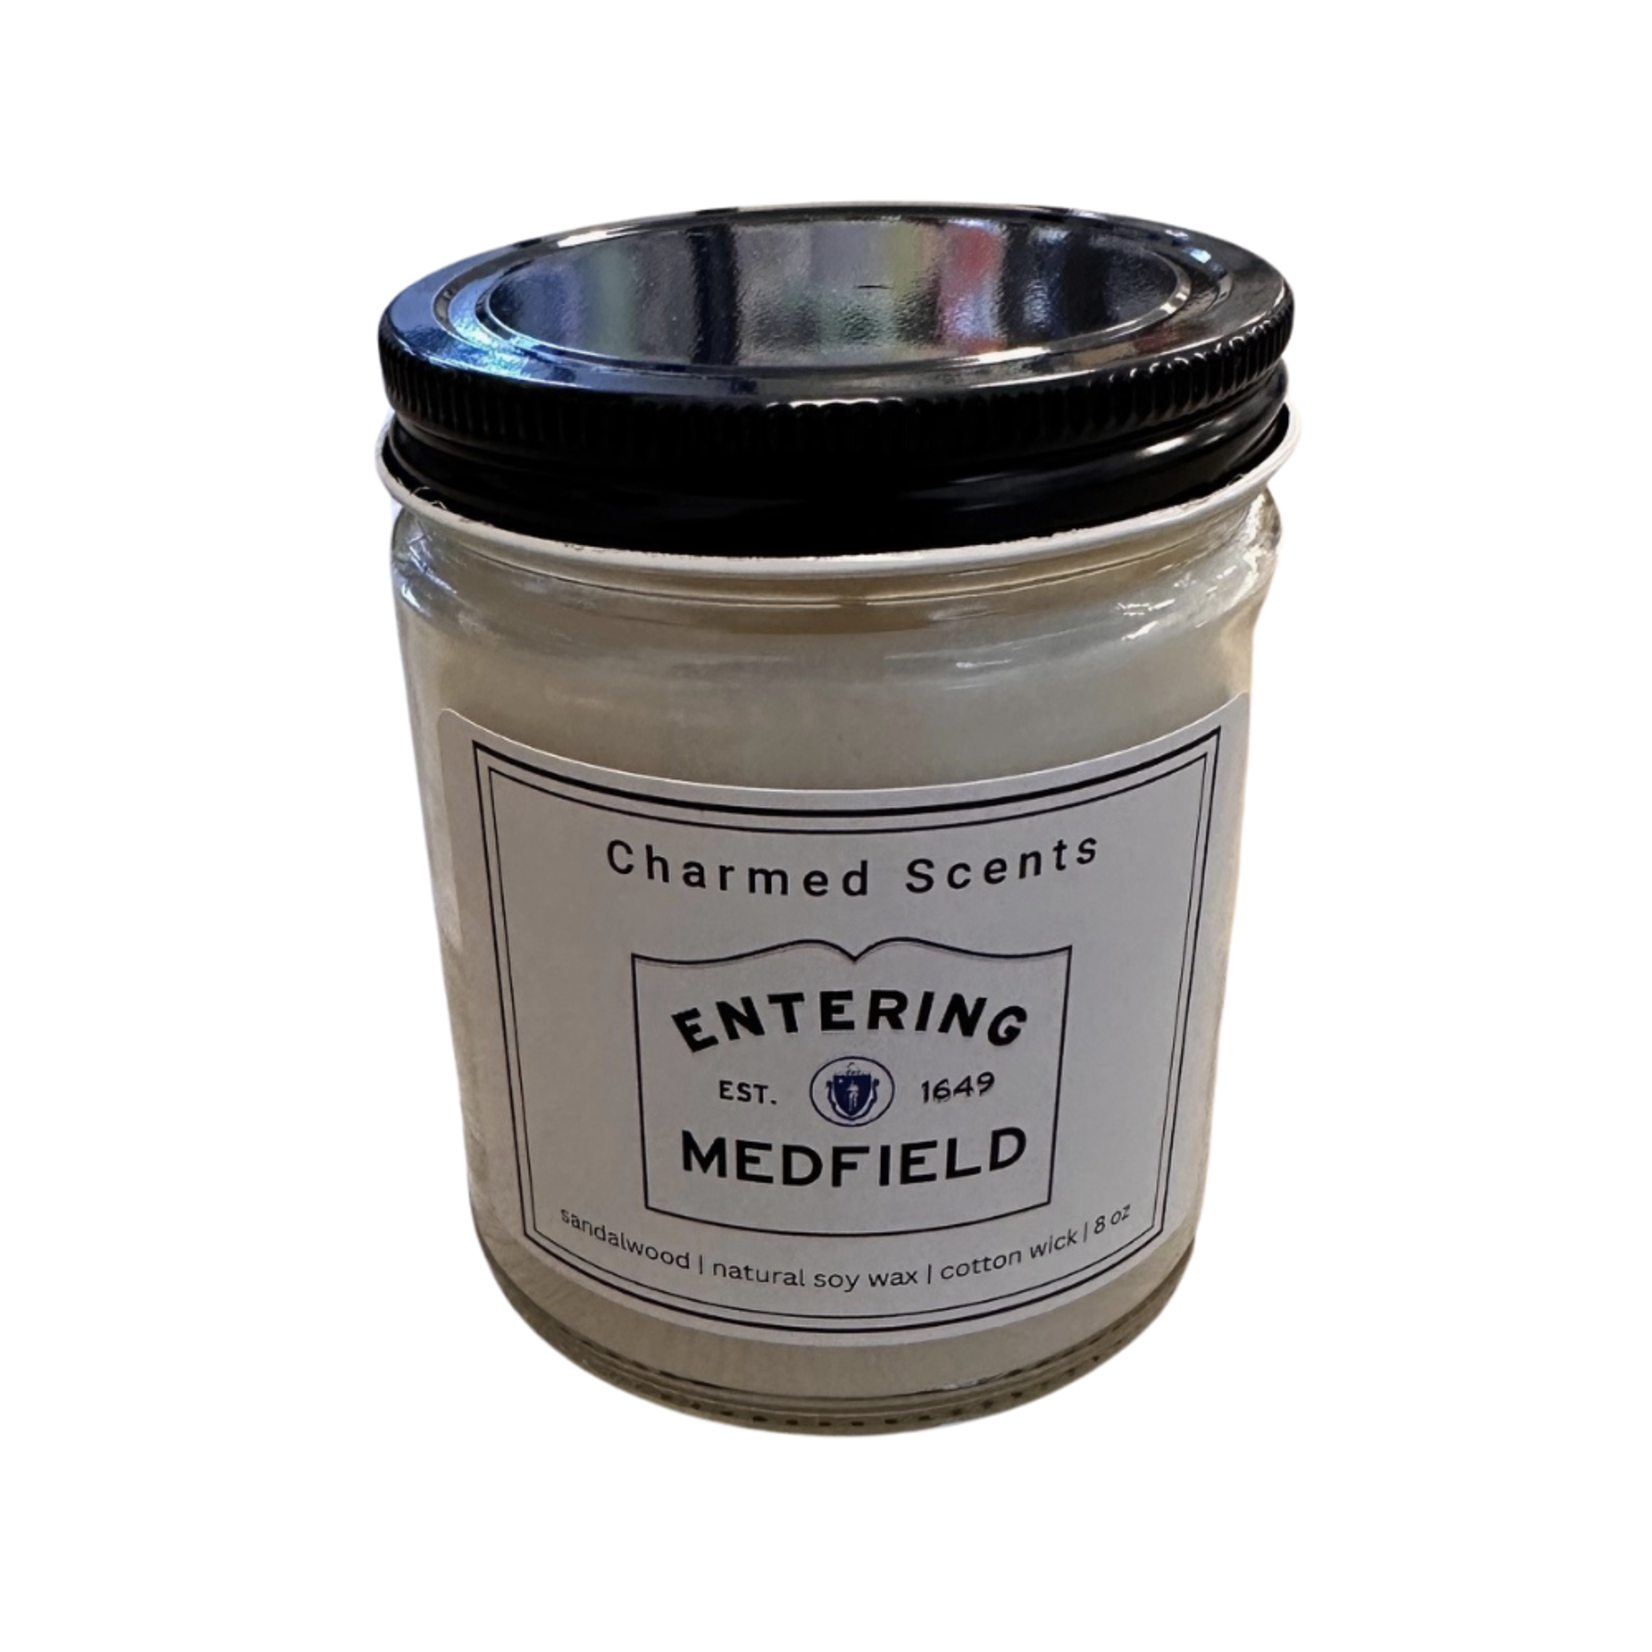 Charmed Scents - 8 oz Soy Candle - Entering Medfield